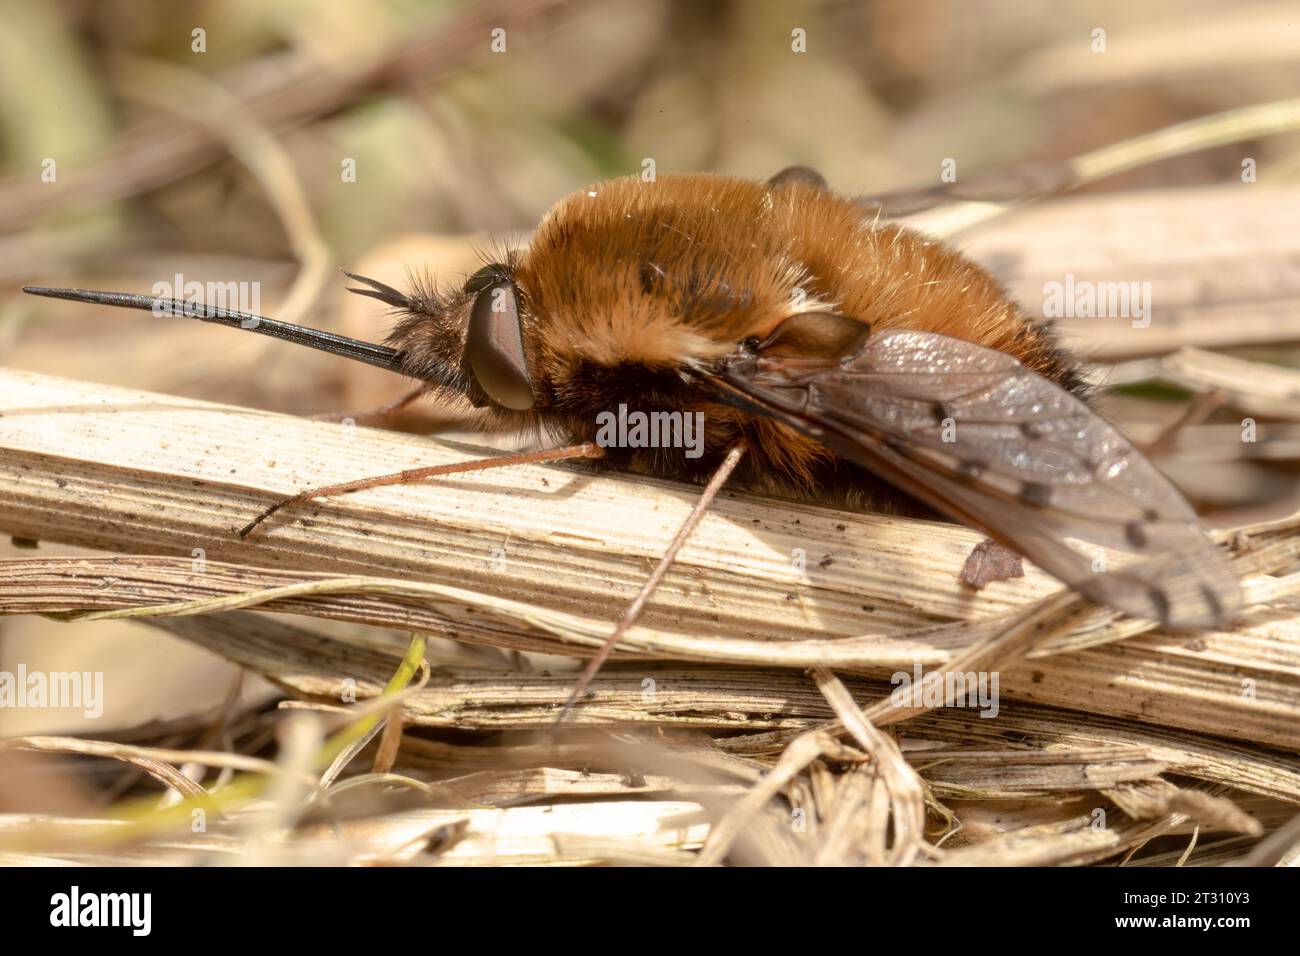 A Dark-edged Bee-fly basking in the Spring sun, showing its massive proboscis, adapted for drinking nectar from flowers, like a humming bird. Stock Photo